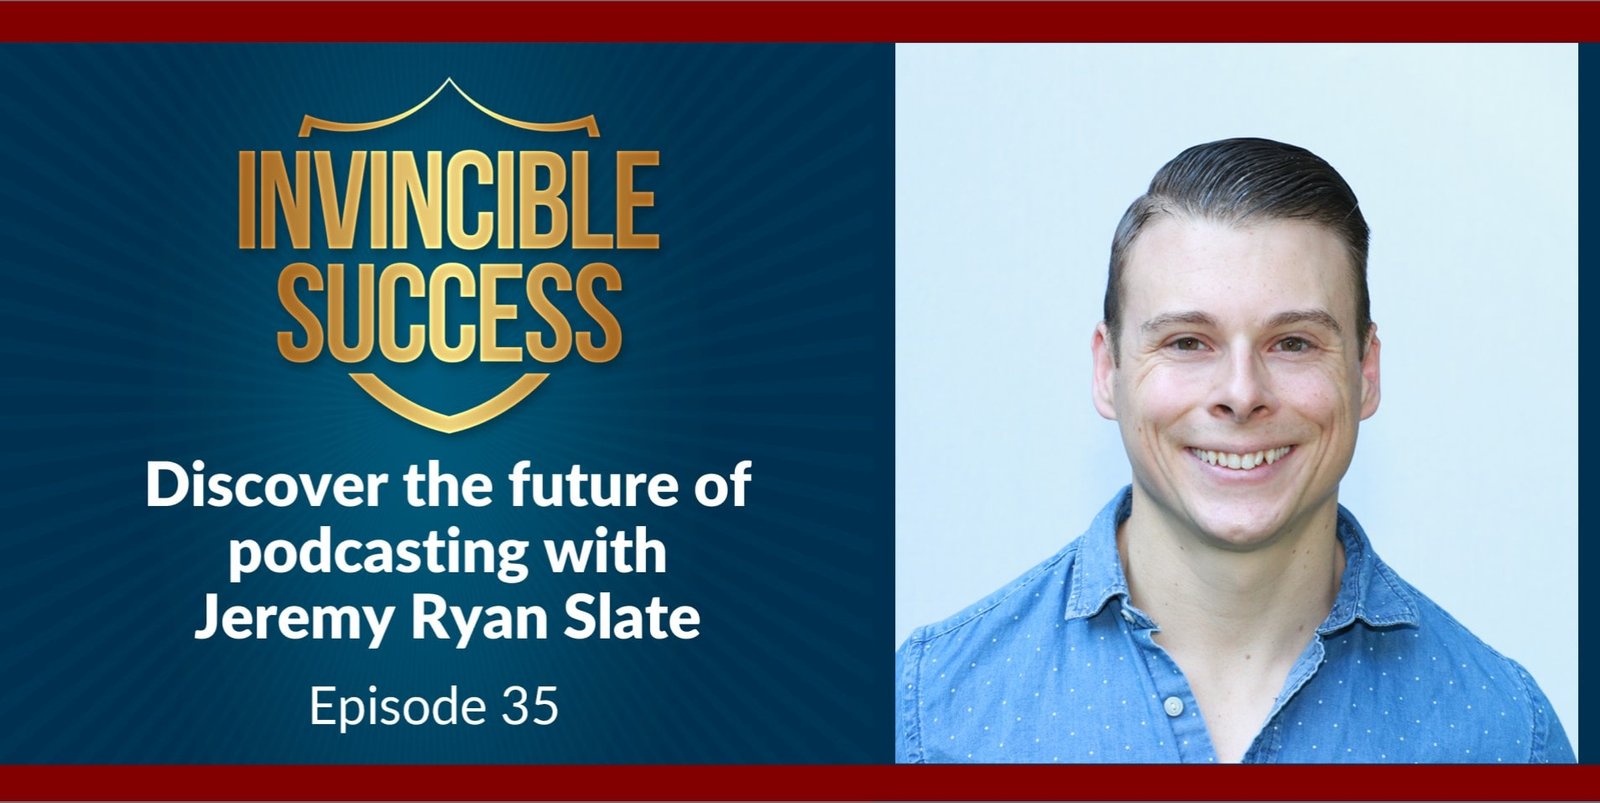 Discover the Future of Podcasting with Jeremy Ryan Slate